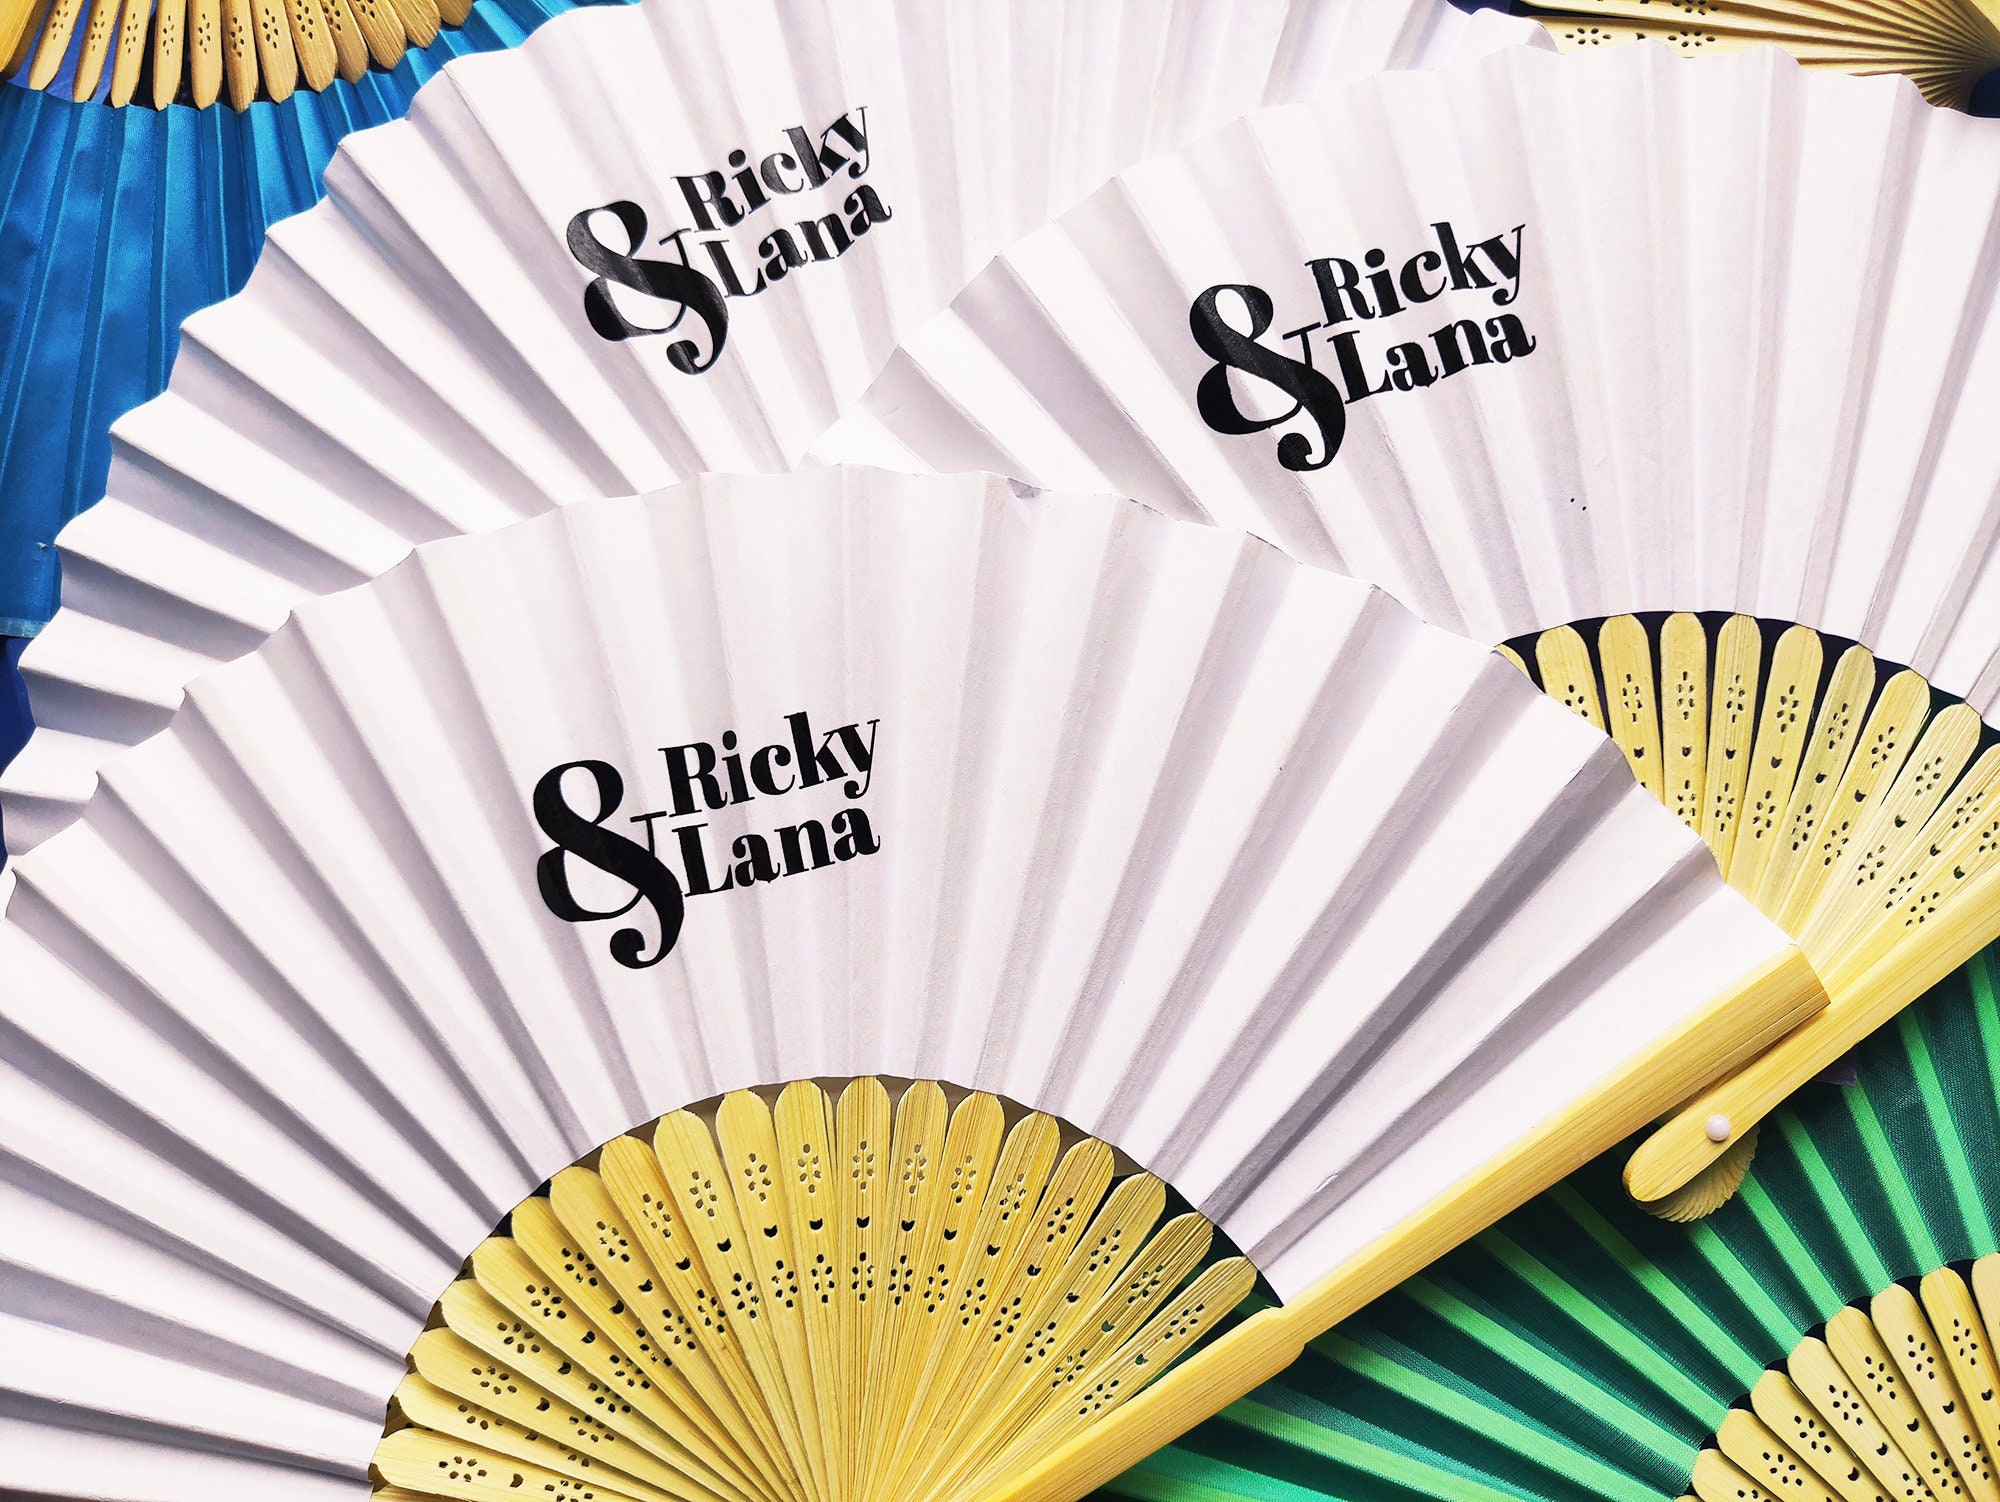 Personalized Paper Fans w/ Side Print - FREE Personalization